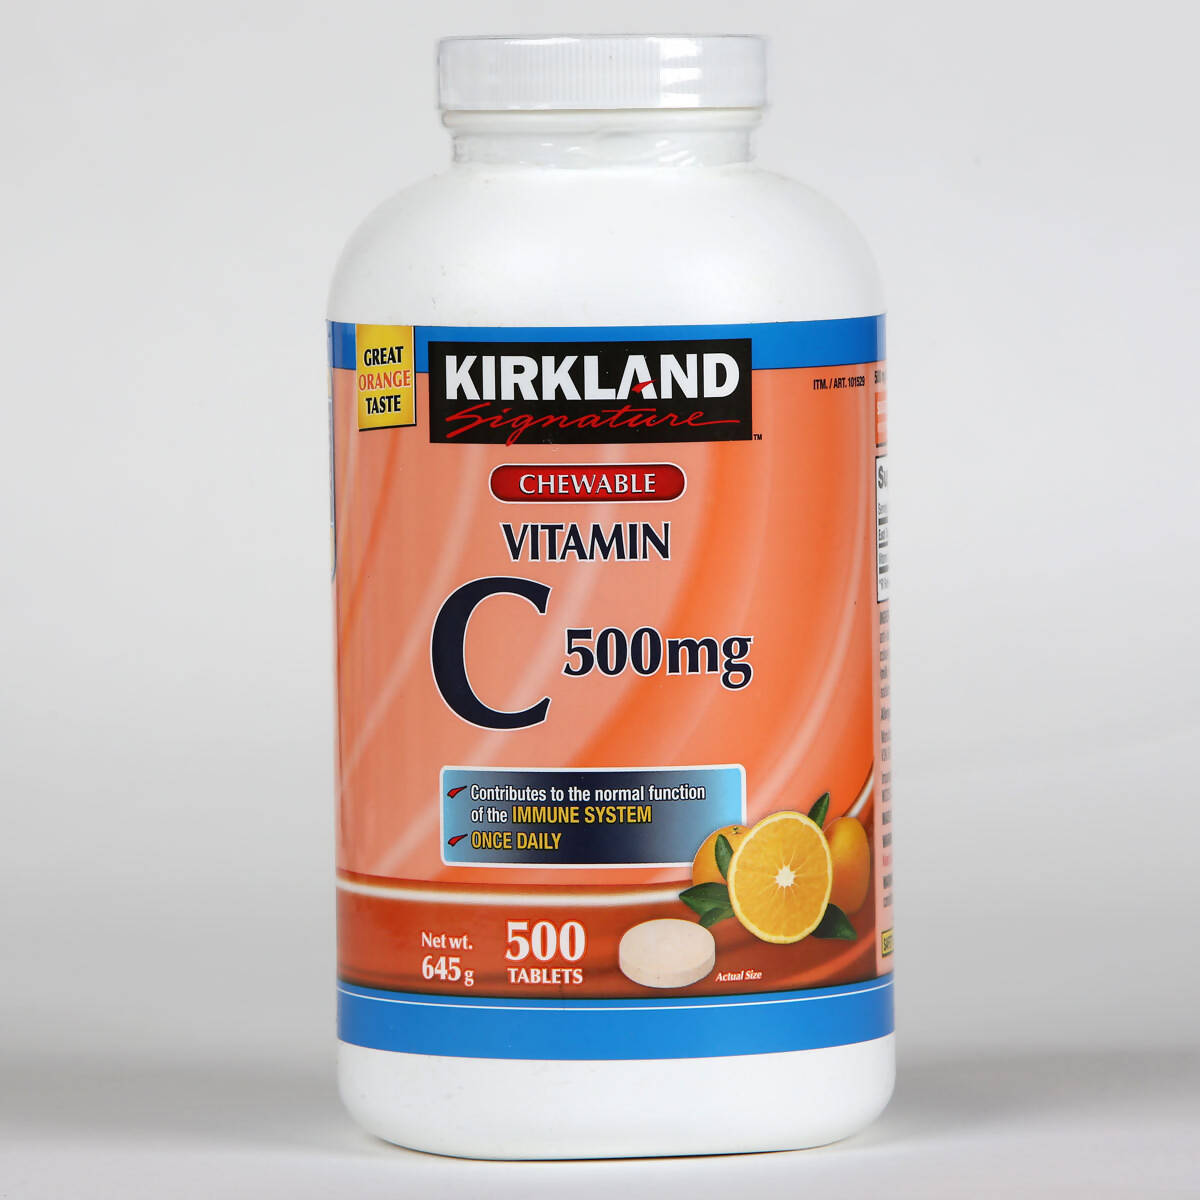 Kirkland Signature Chewable Once Daily Vitamin C, 500 Tablets (16 Months Supply) Vitamins Costco UK   